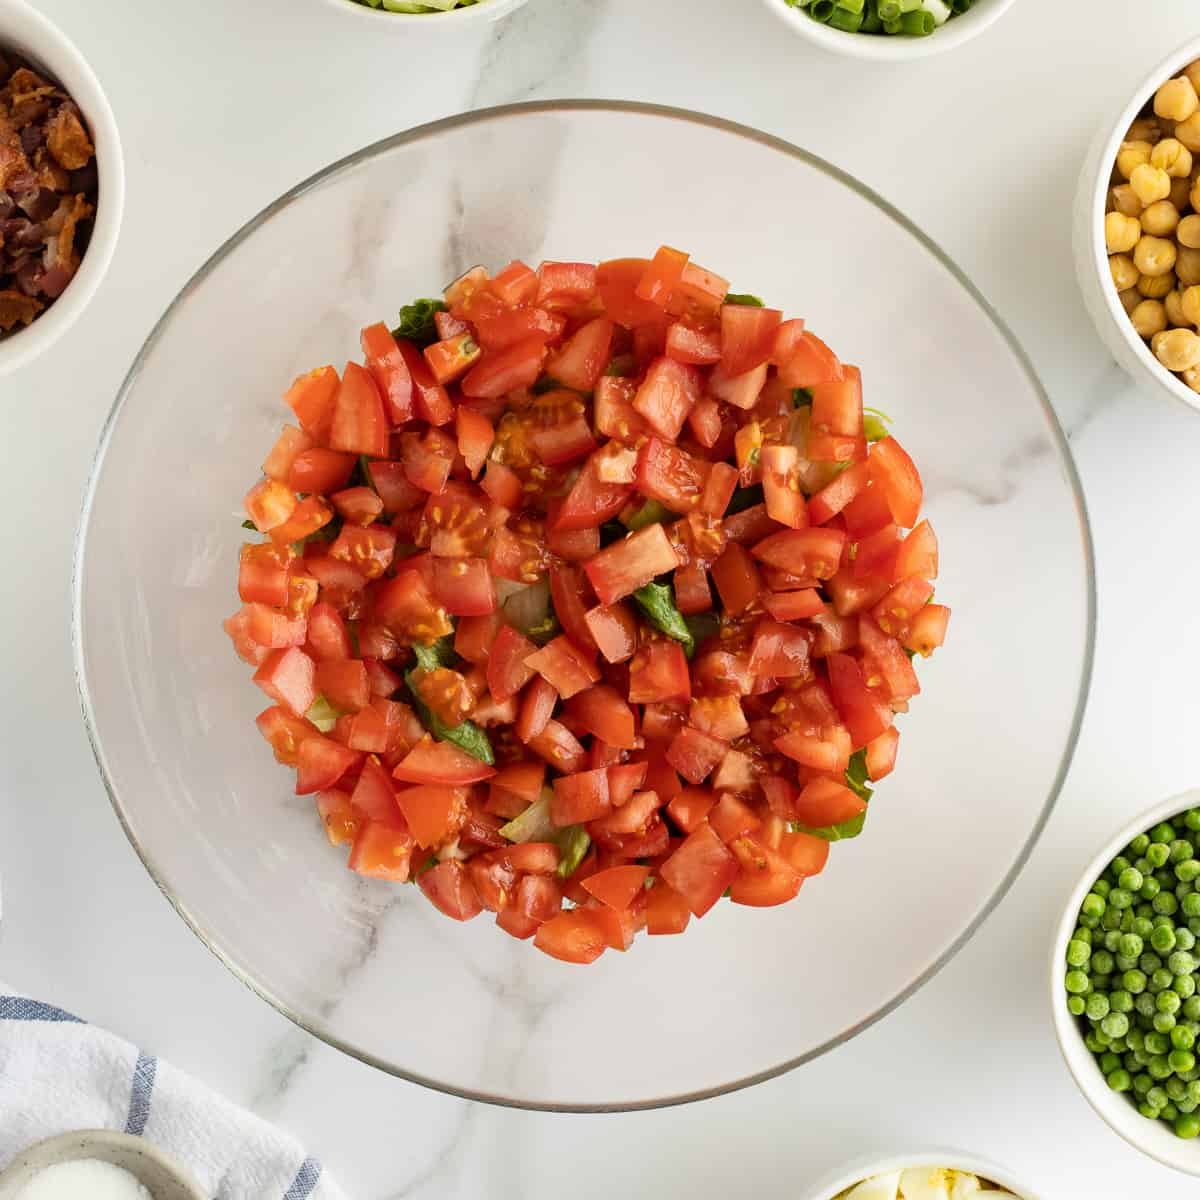 A layer of chopped tomatoes in a glass bowl.